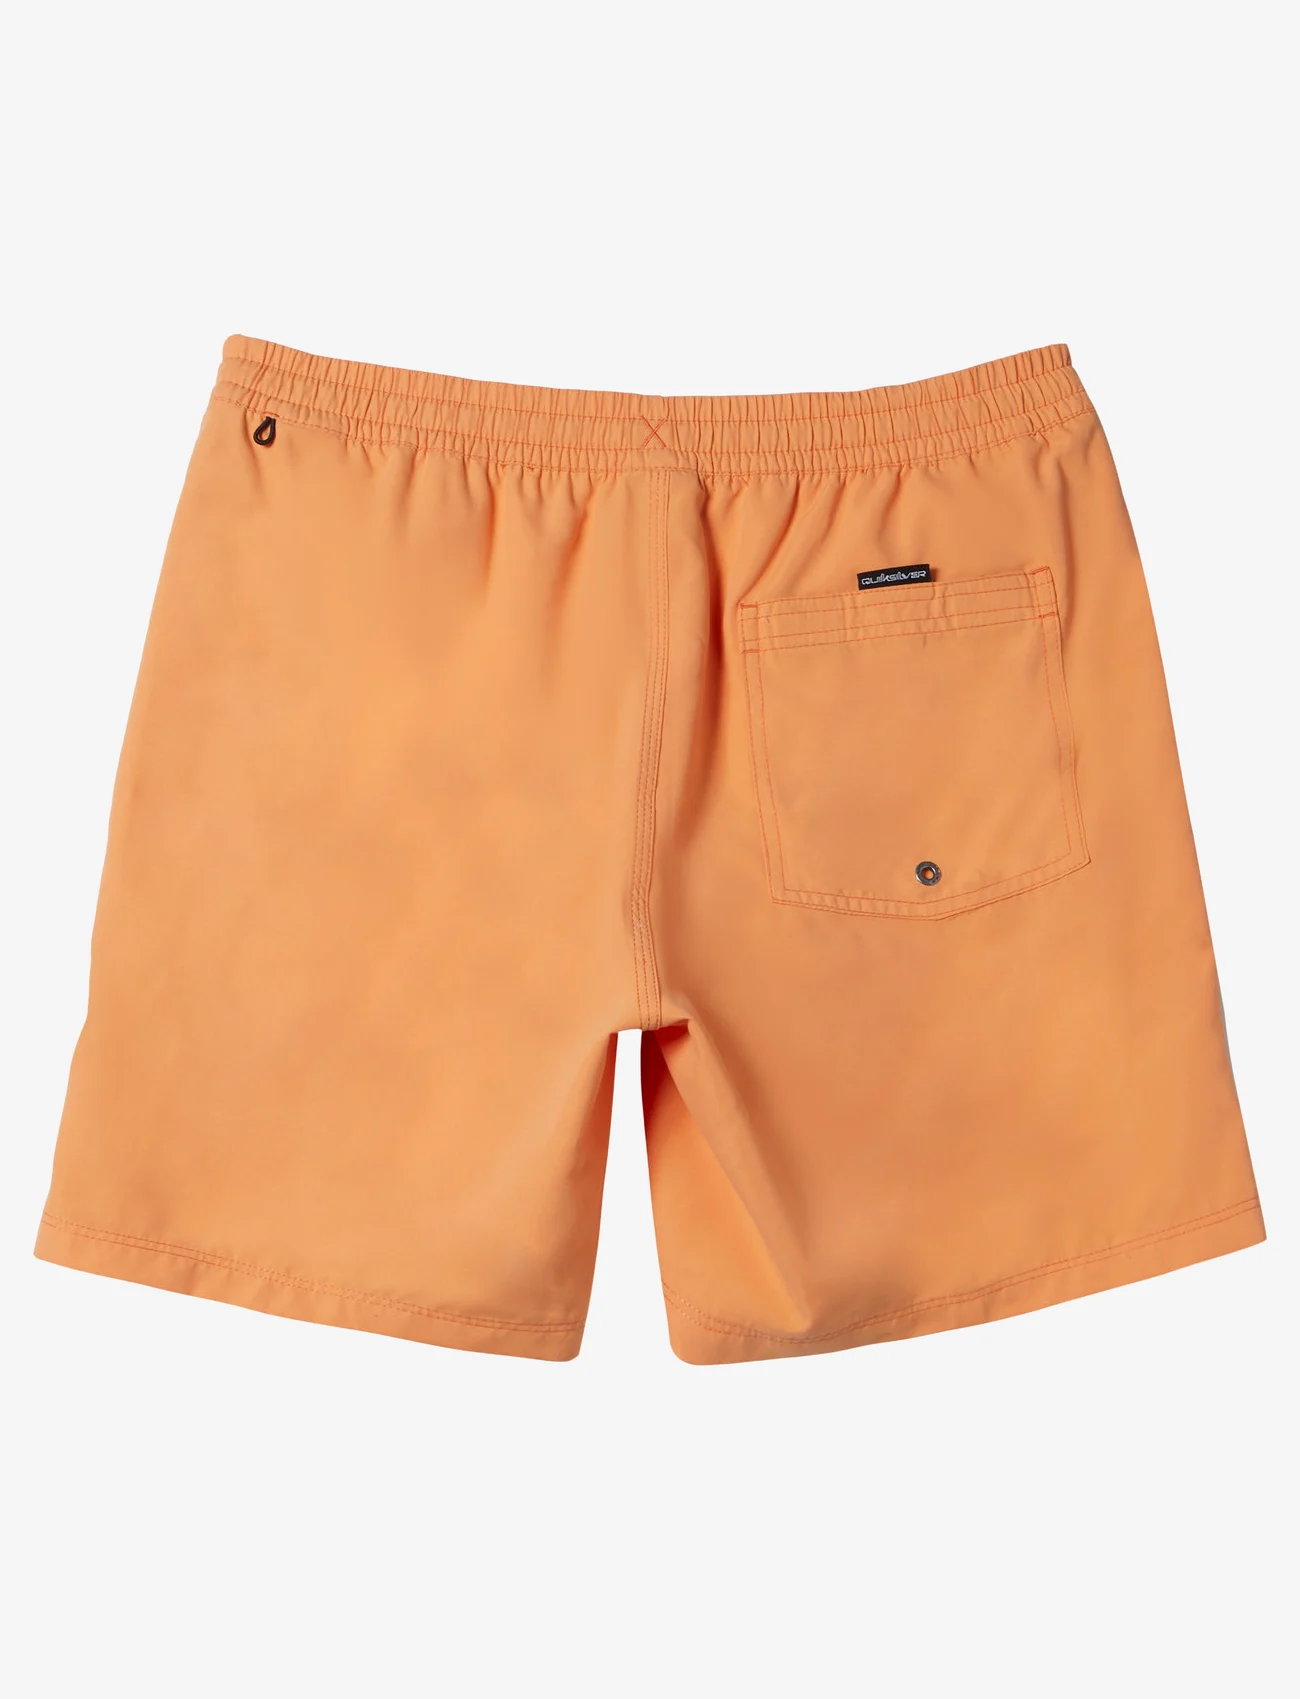 Quiksilver - EVERYDAY SOLID VOLLEY 15 - swim shorts - tangerine - 1